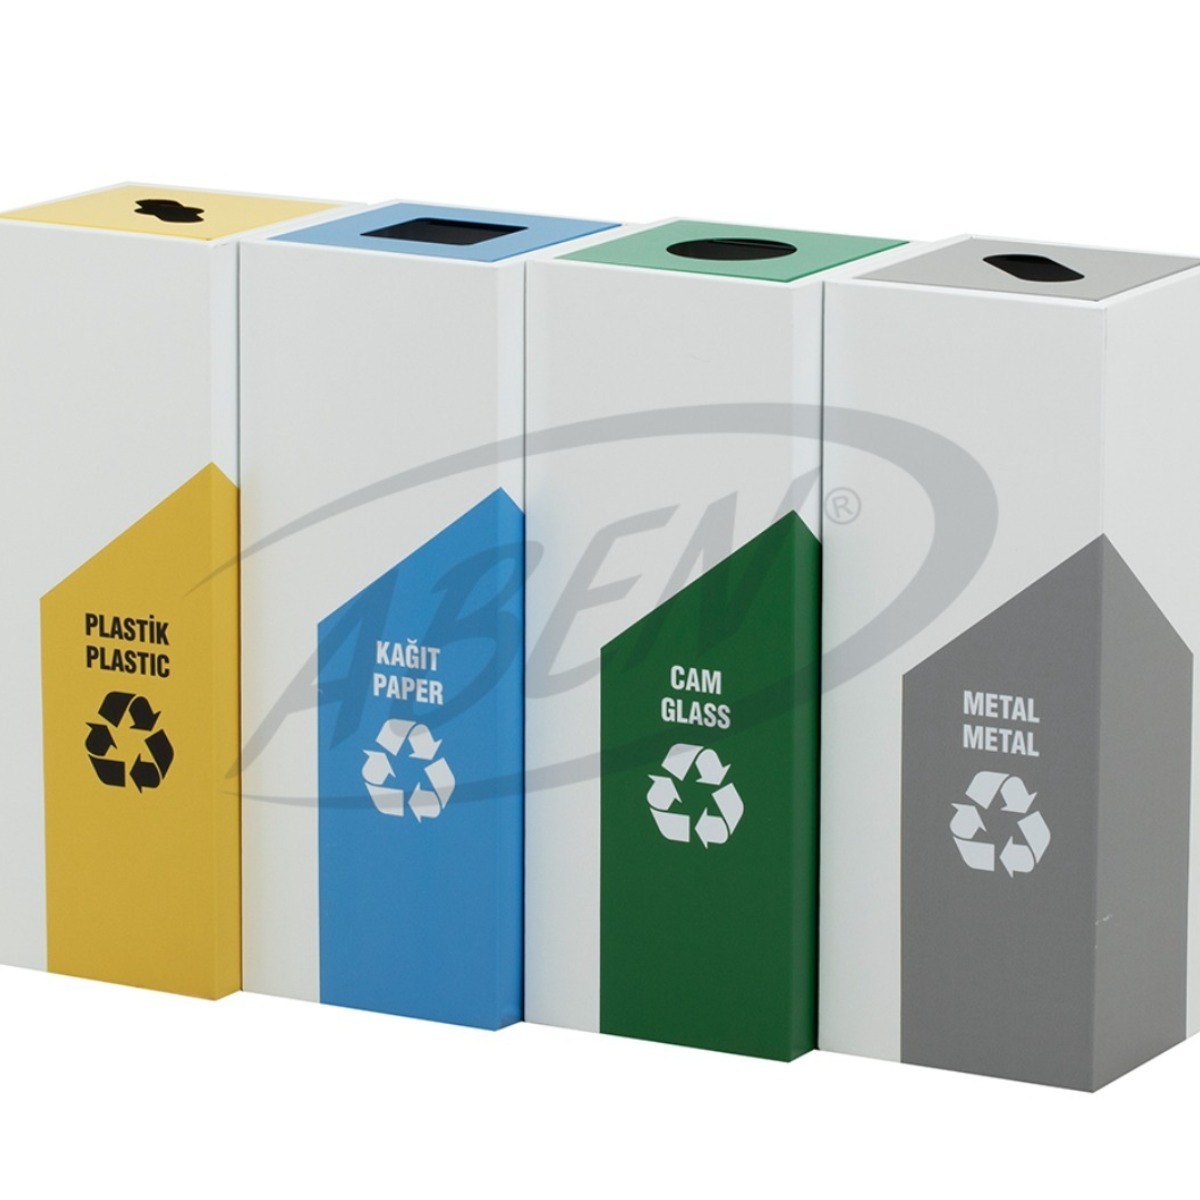 AB-725 4’Part Recycle Bin product logo